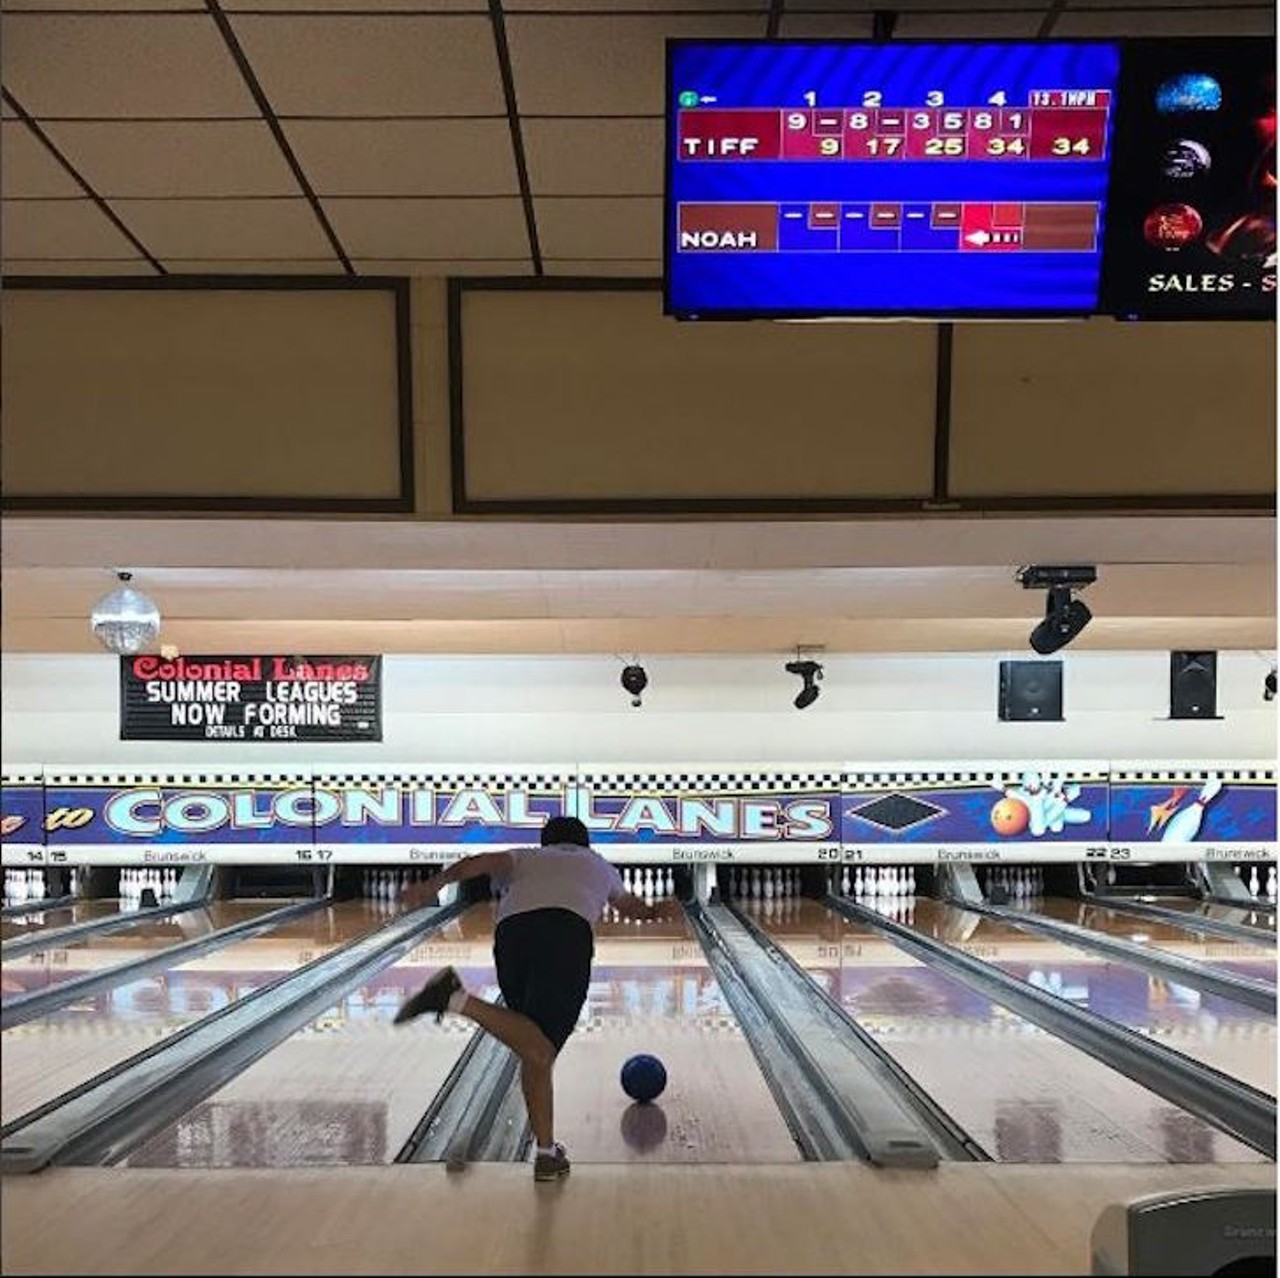 Try to bowl over 100 at Colonial Lanes
400 Primrose Dr, Orlando, FL 32803, 407-894-0361
Tuesdays have $8 all you can bowl as well as $8 PBR buckets, and weekdays have $2.25 games from 3 p.m.-6 p.m. On Wednesdays at 9 p.m.m there are colored pin heads you can strike for a free, cold beer, which should help with the heat.
Photo via with_love_n_squalor/Instagram